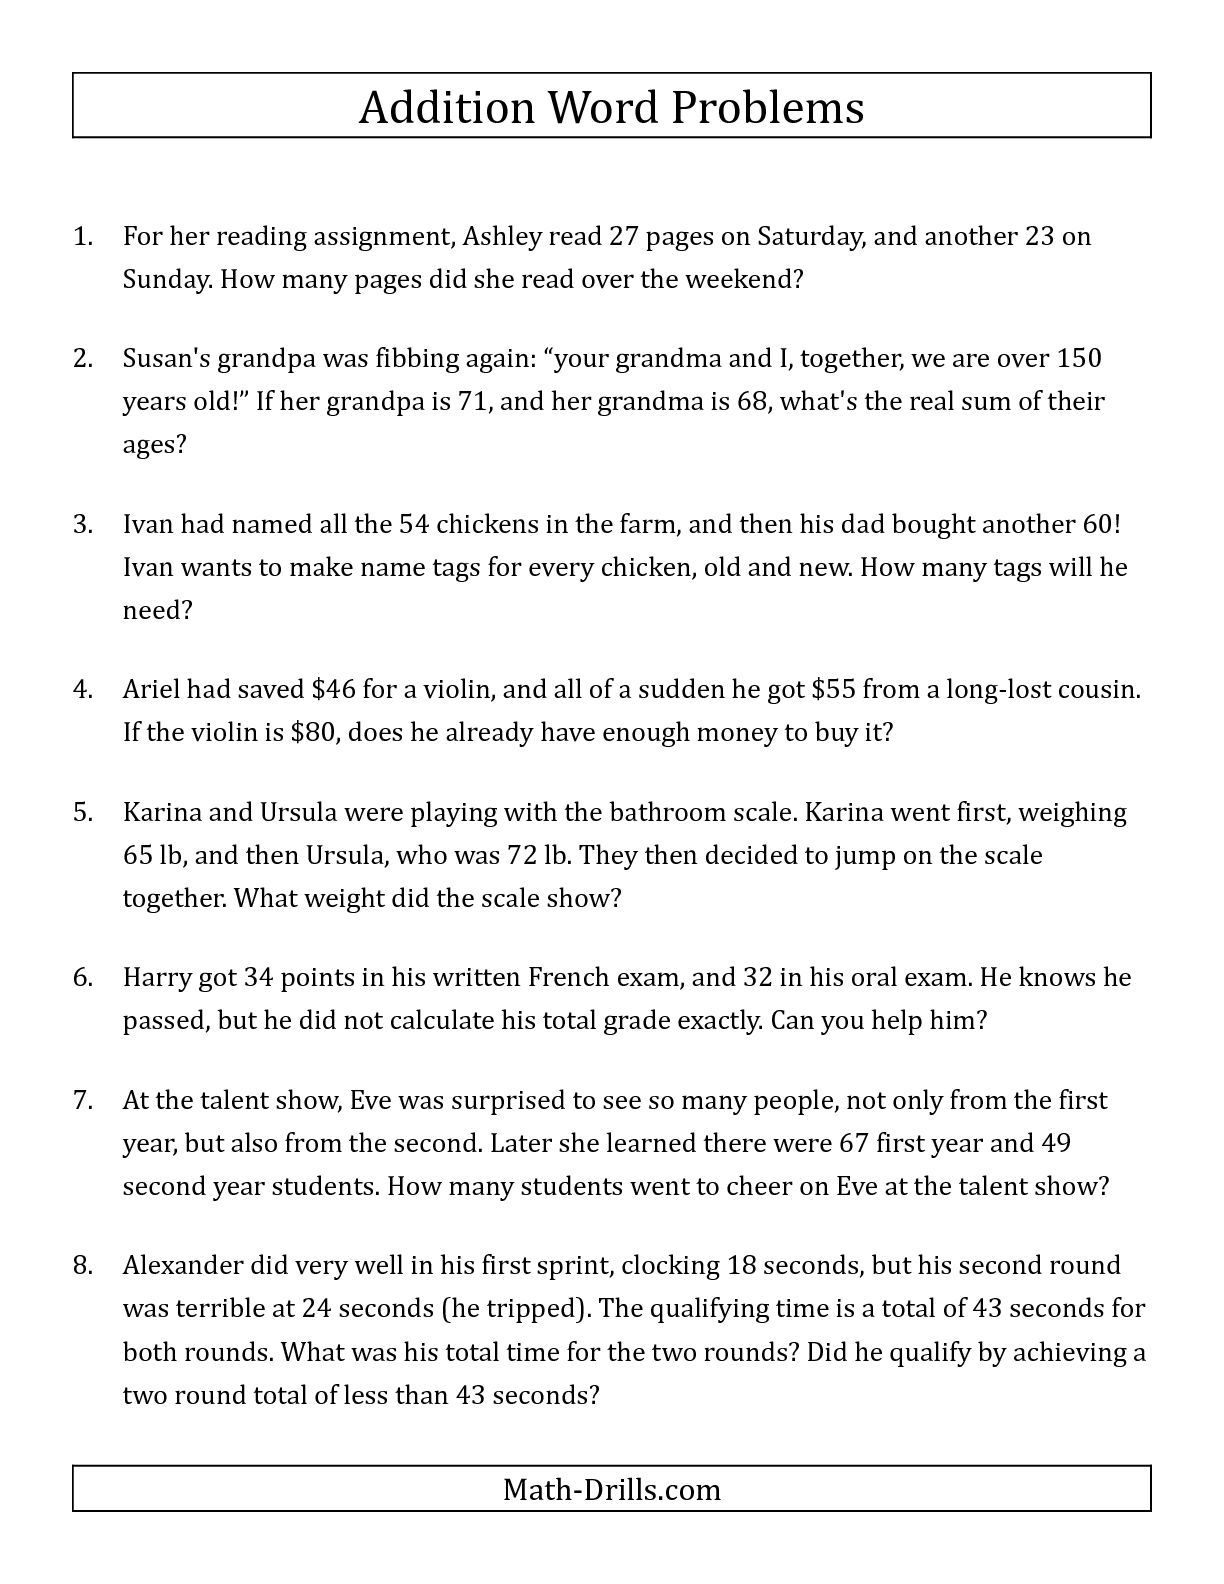 The Single-Step Addition Word Problems Using Two-Digit Numbers (A | Third Grade Math Word Problems Printable Worksheets